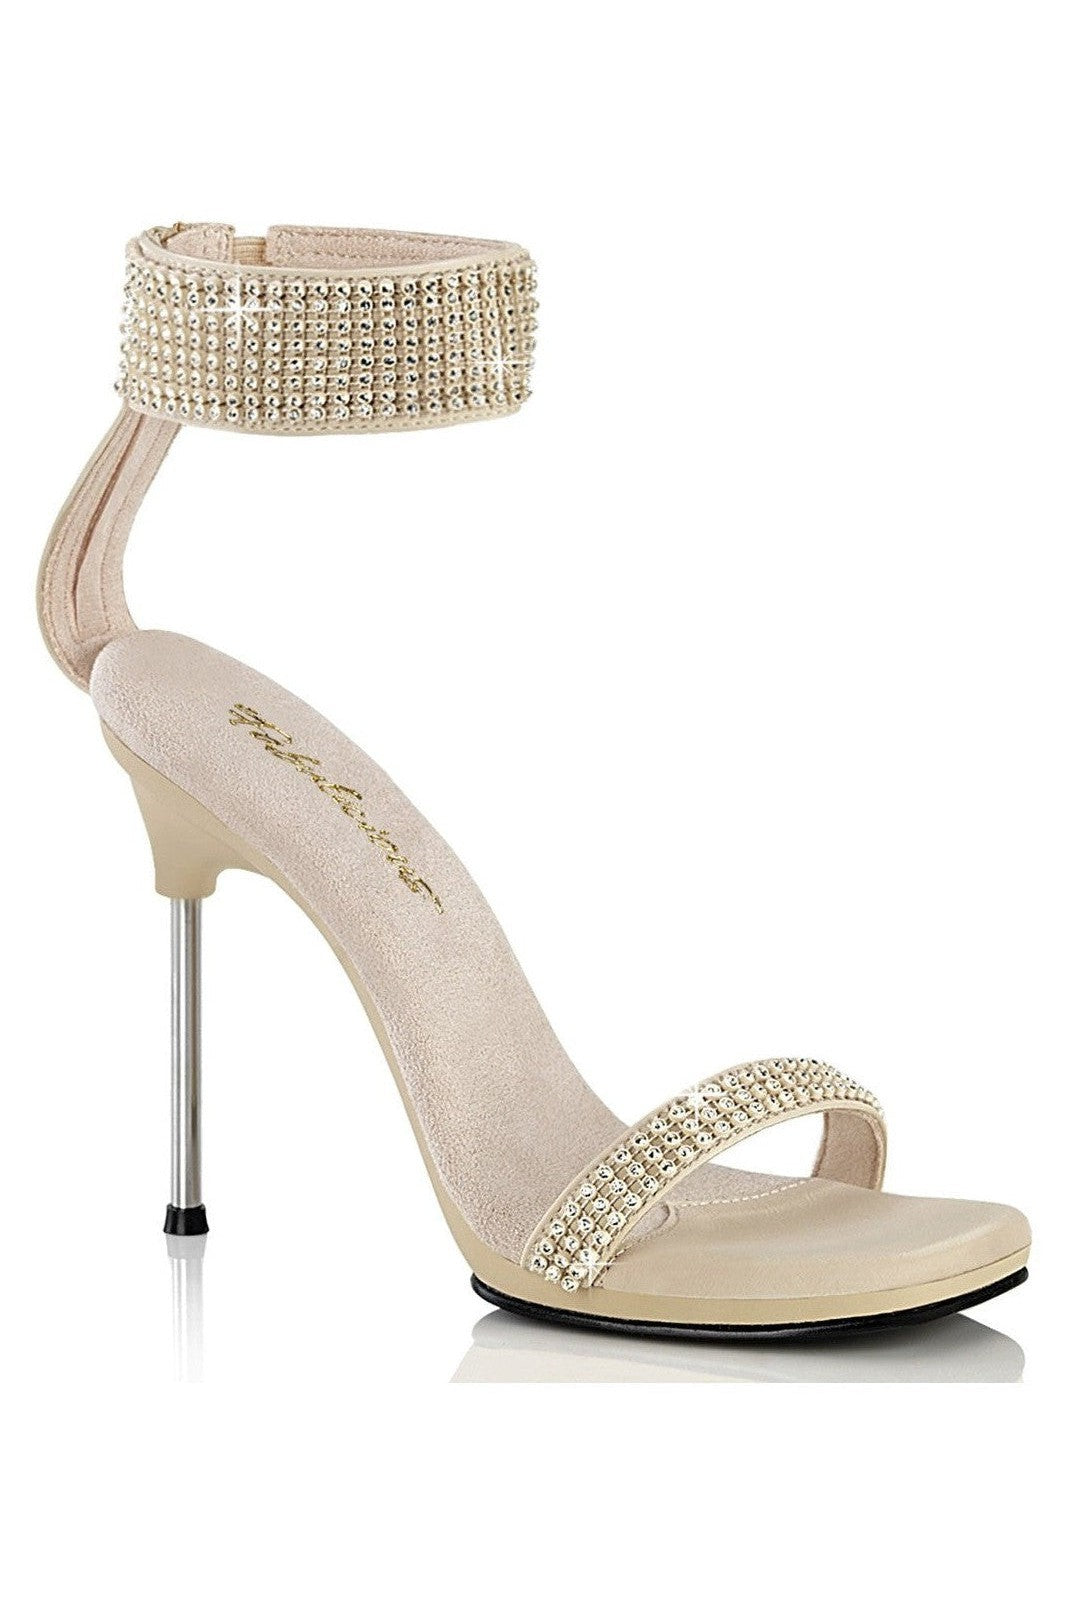 Fabulicious Nude Sandals Platform Stripper Shoes | Buy at Sexyshoes.com